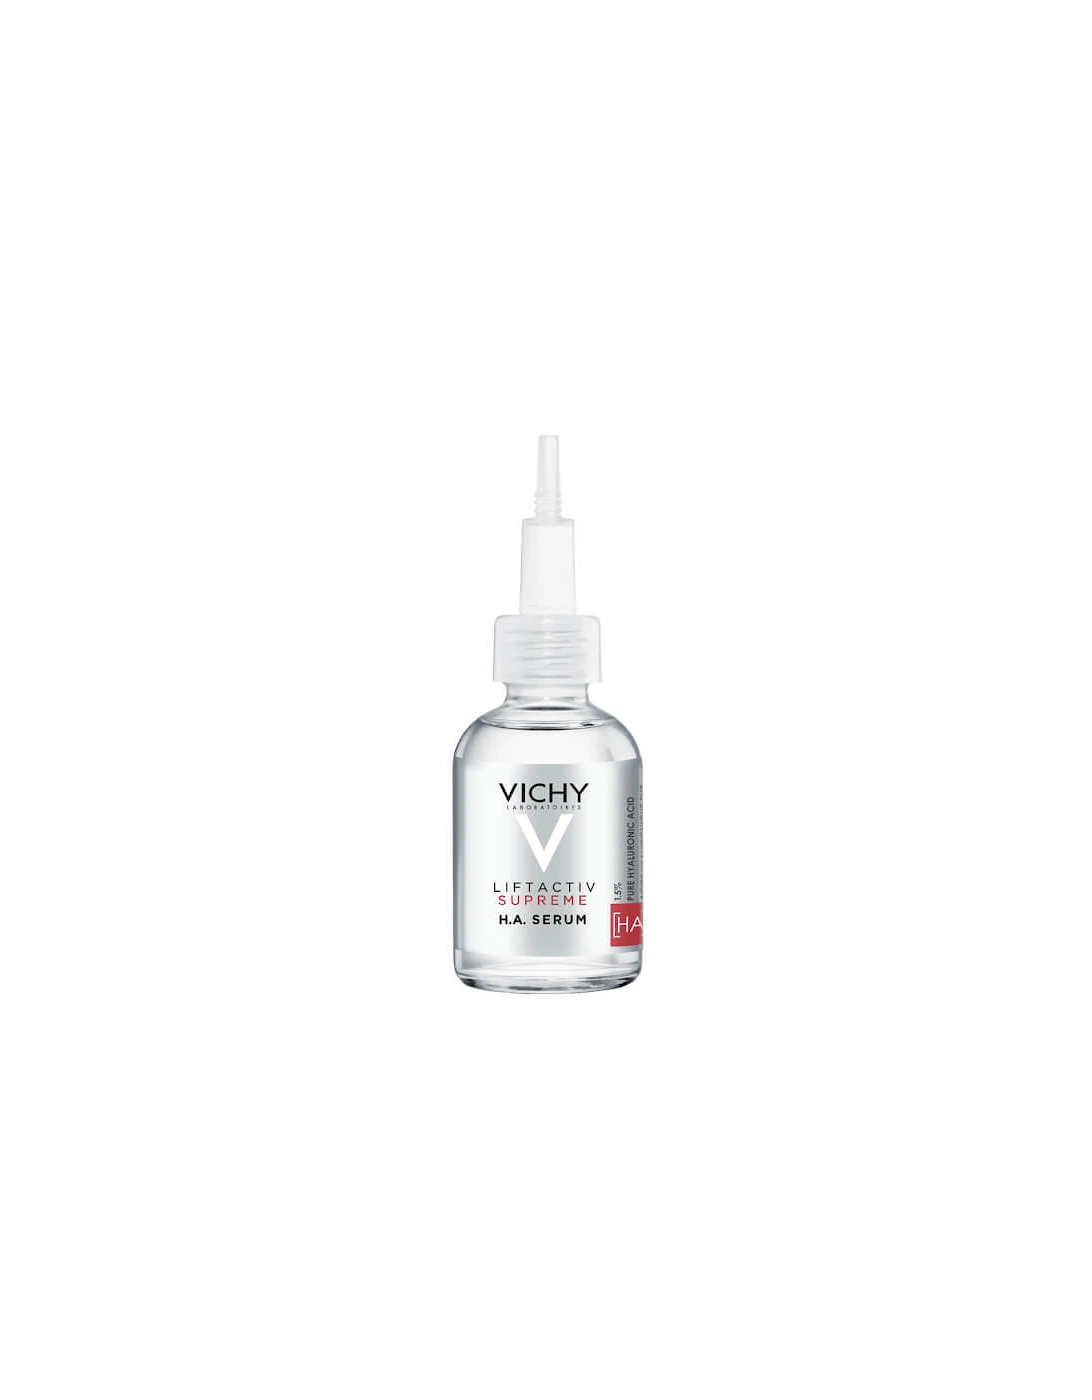 Liftactiv H.A Epidermic Filler Smoothing 1.5%  Hyaluronic Acid Serum 30ml - Vichy, 2 of 1